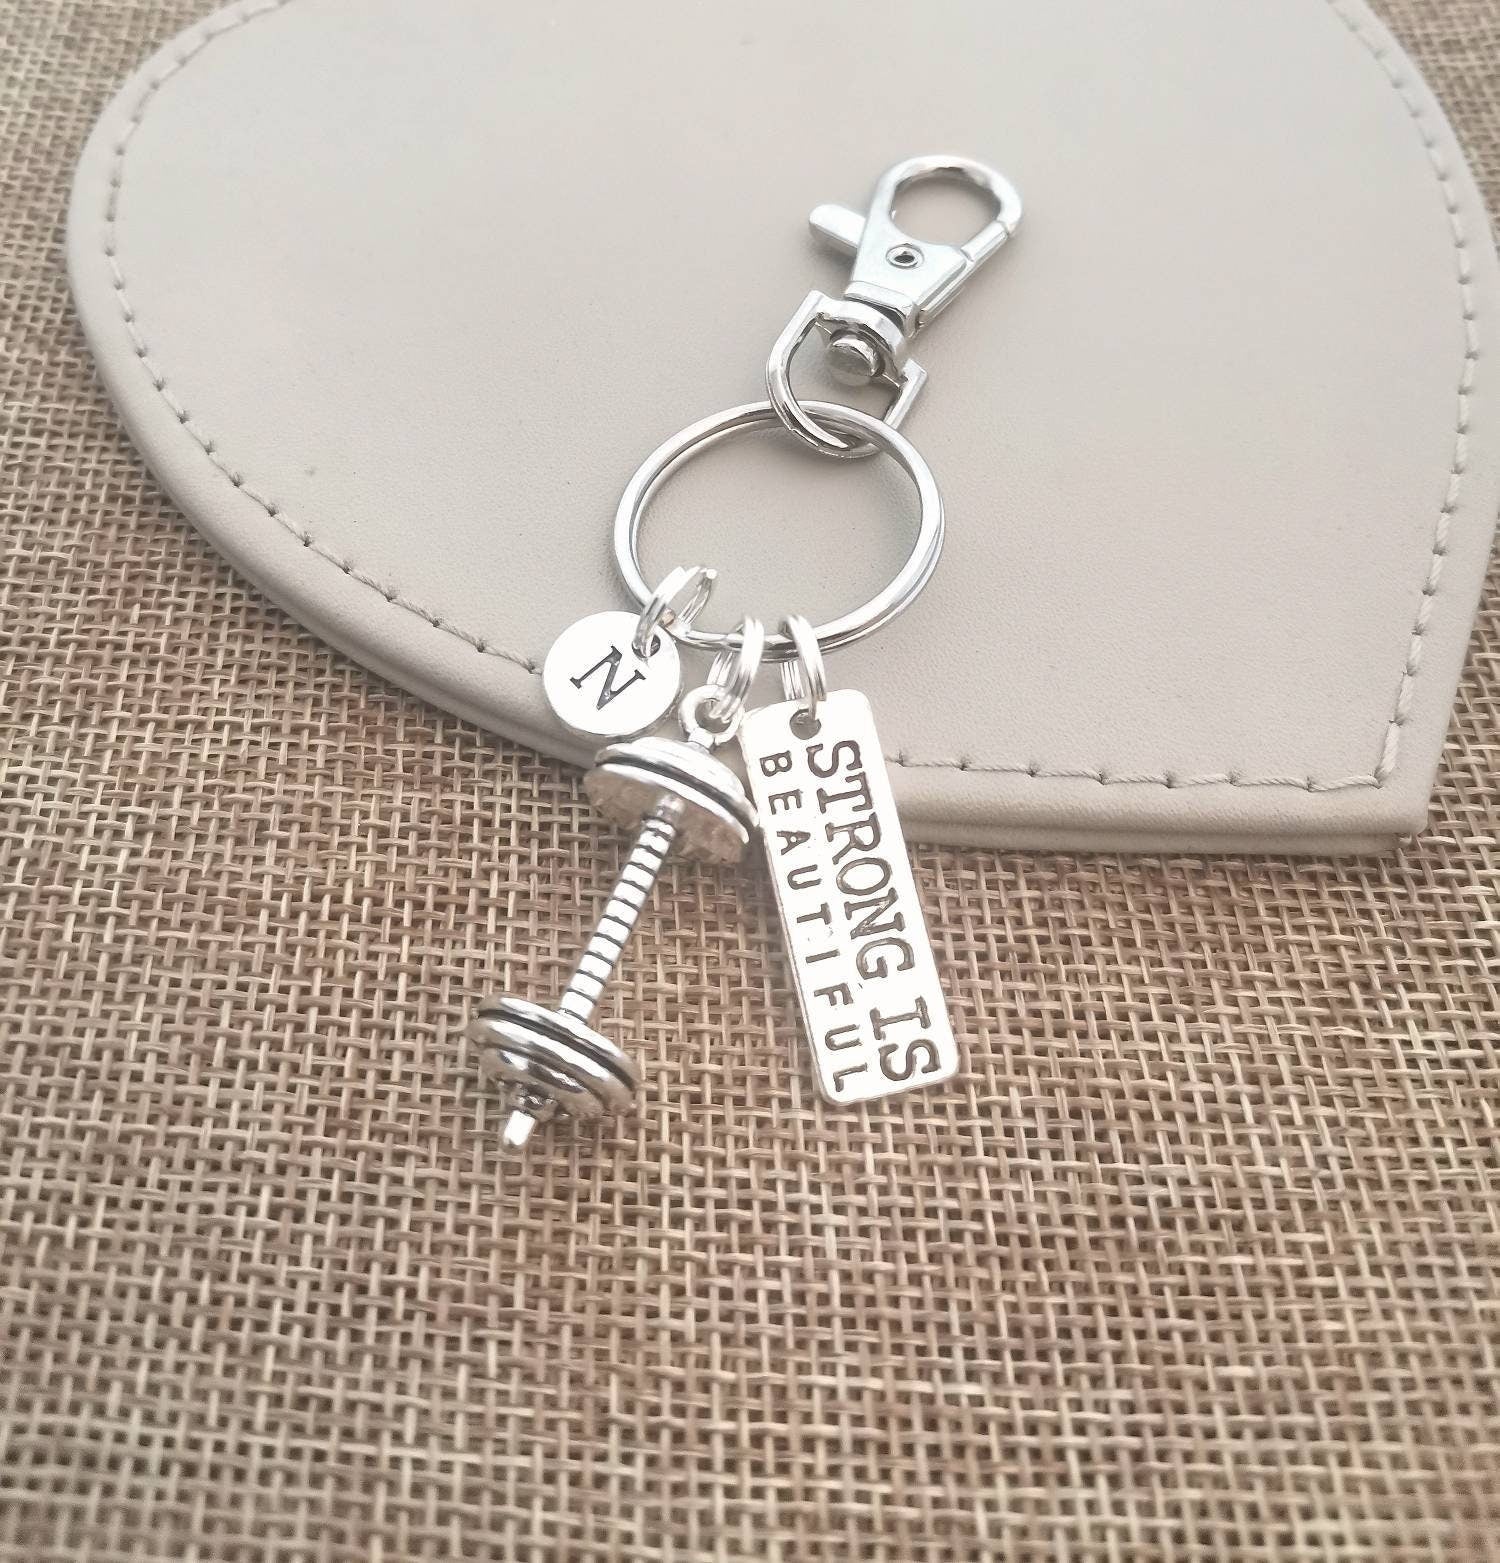 Gym Gift, Gym Key chain, Girlfriend gift, gift for her, Strong is beautiful, Dumbbell Key Ring, Bodybuilding Gifts, Gym Keyring, fitness